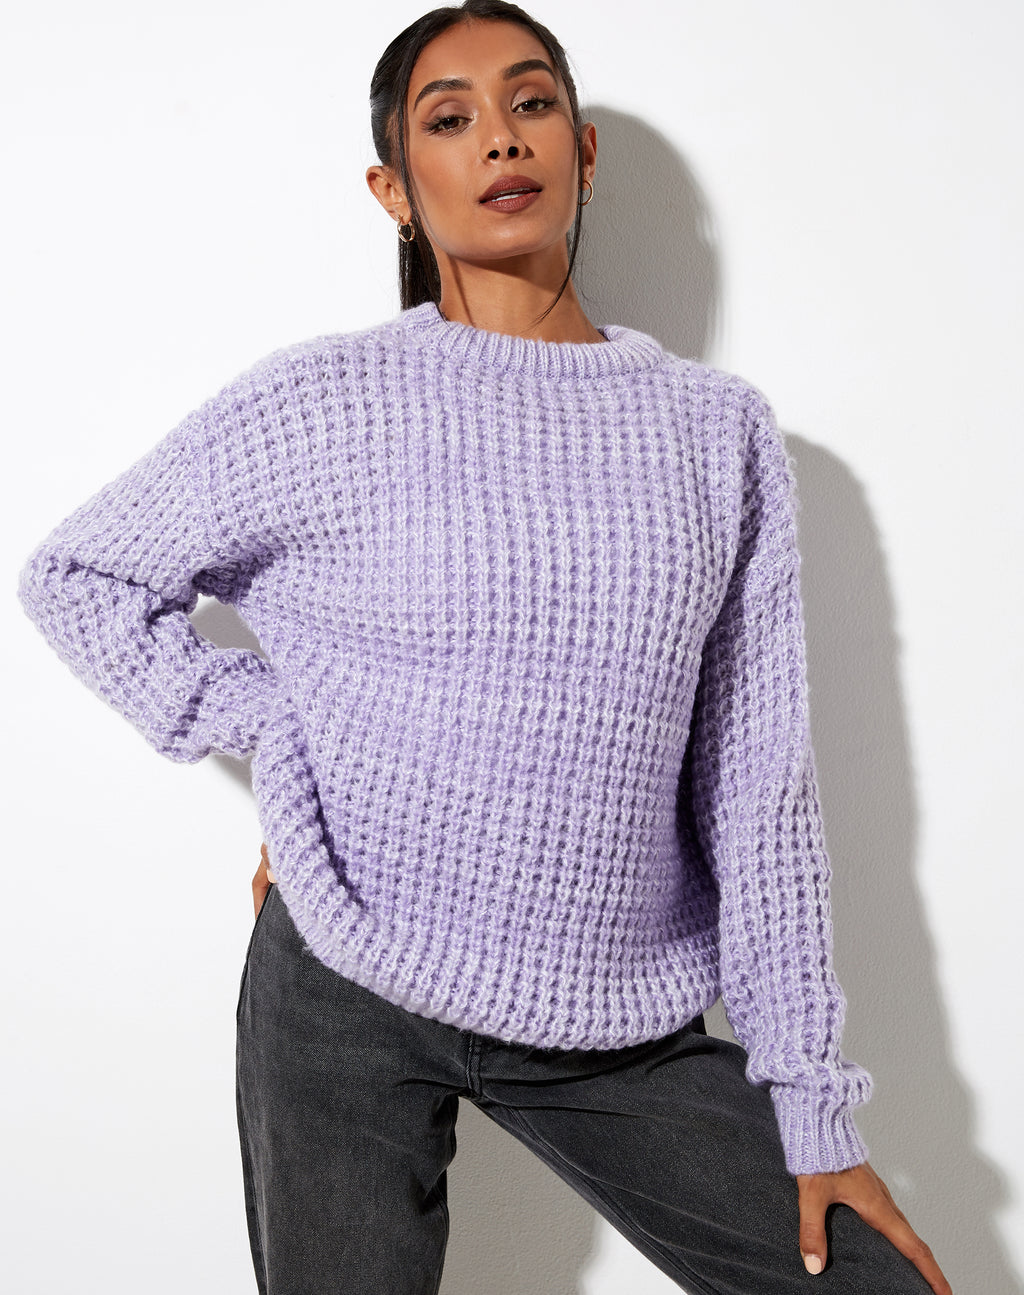 Caribou Jumper in Chunky Knit Lilac and White